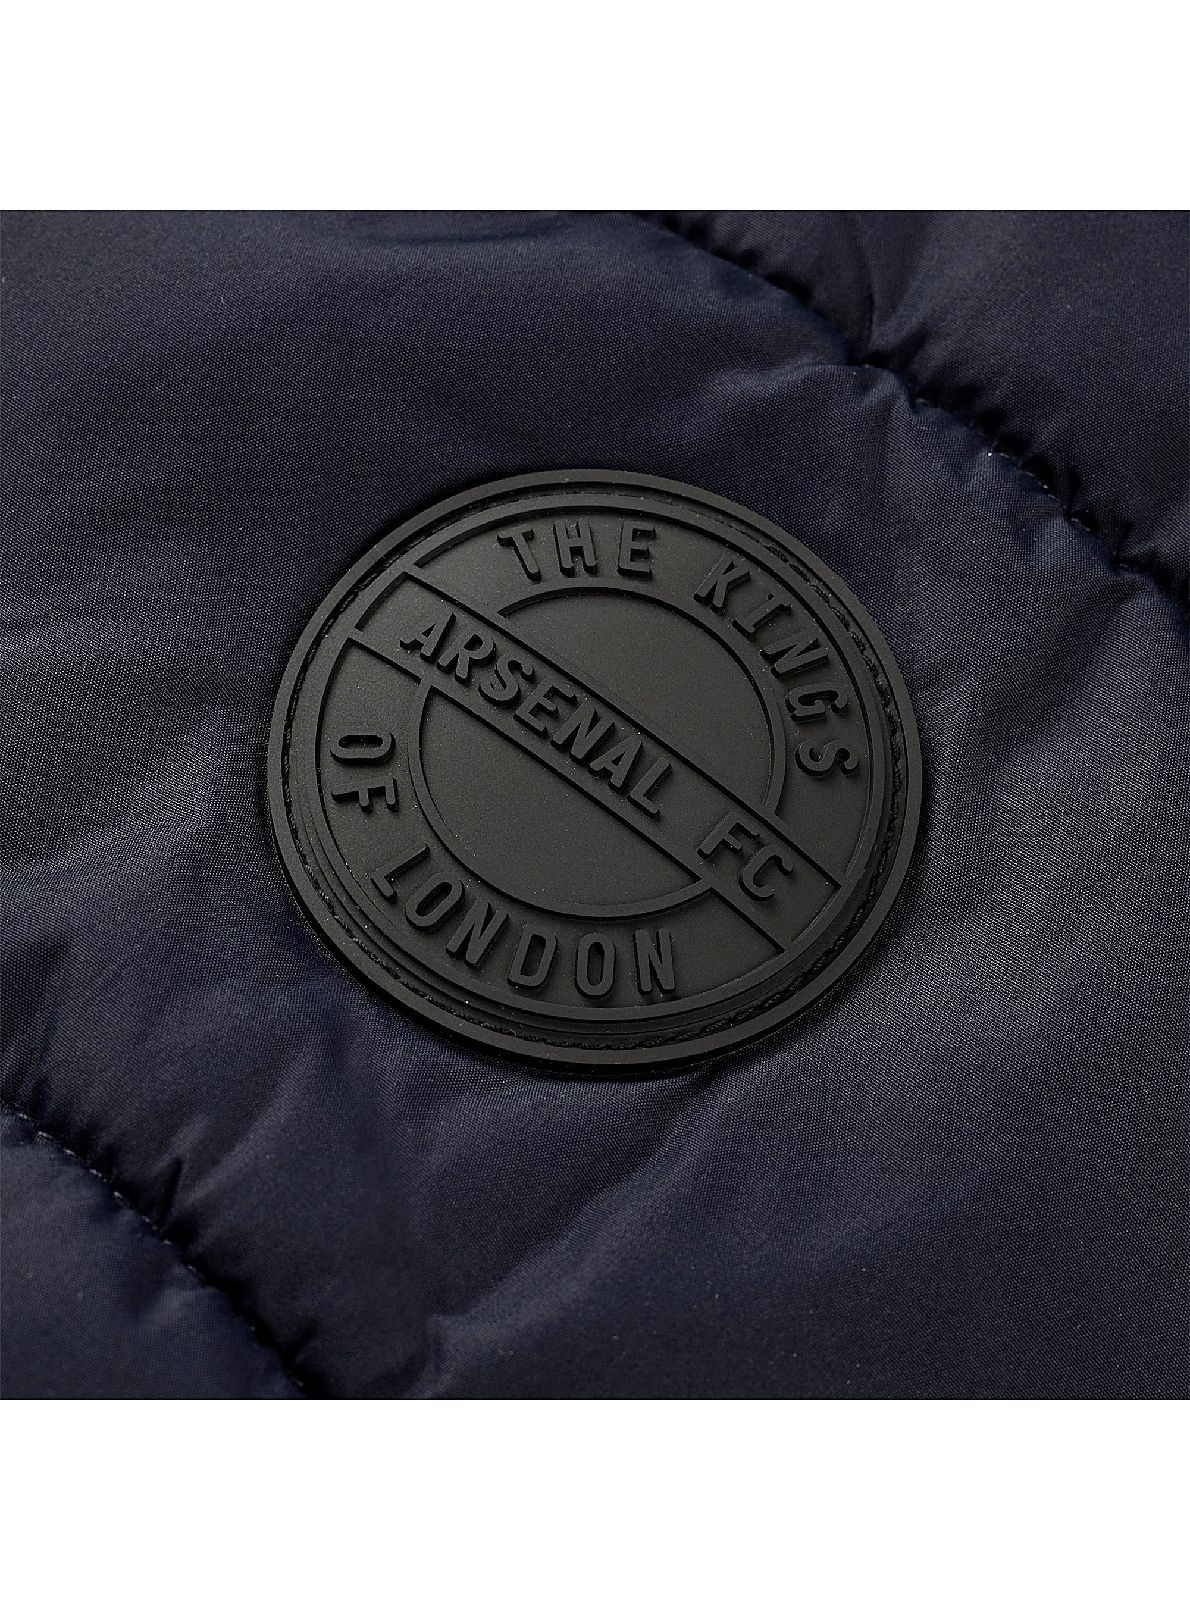 Arsenal Since 1886 Padded Jacket | Official Online Store